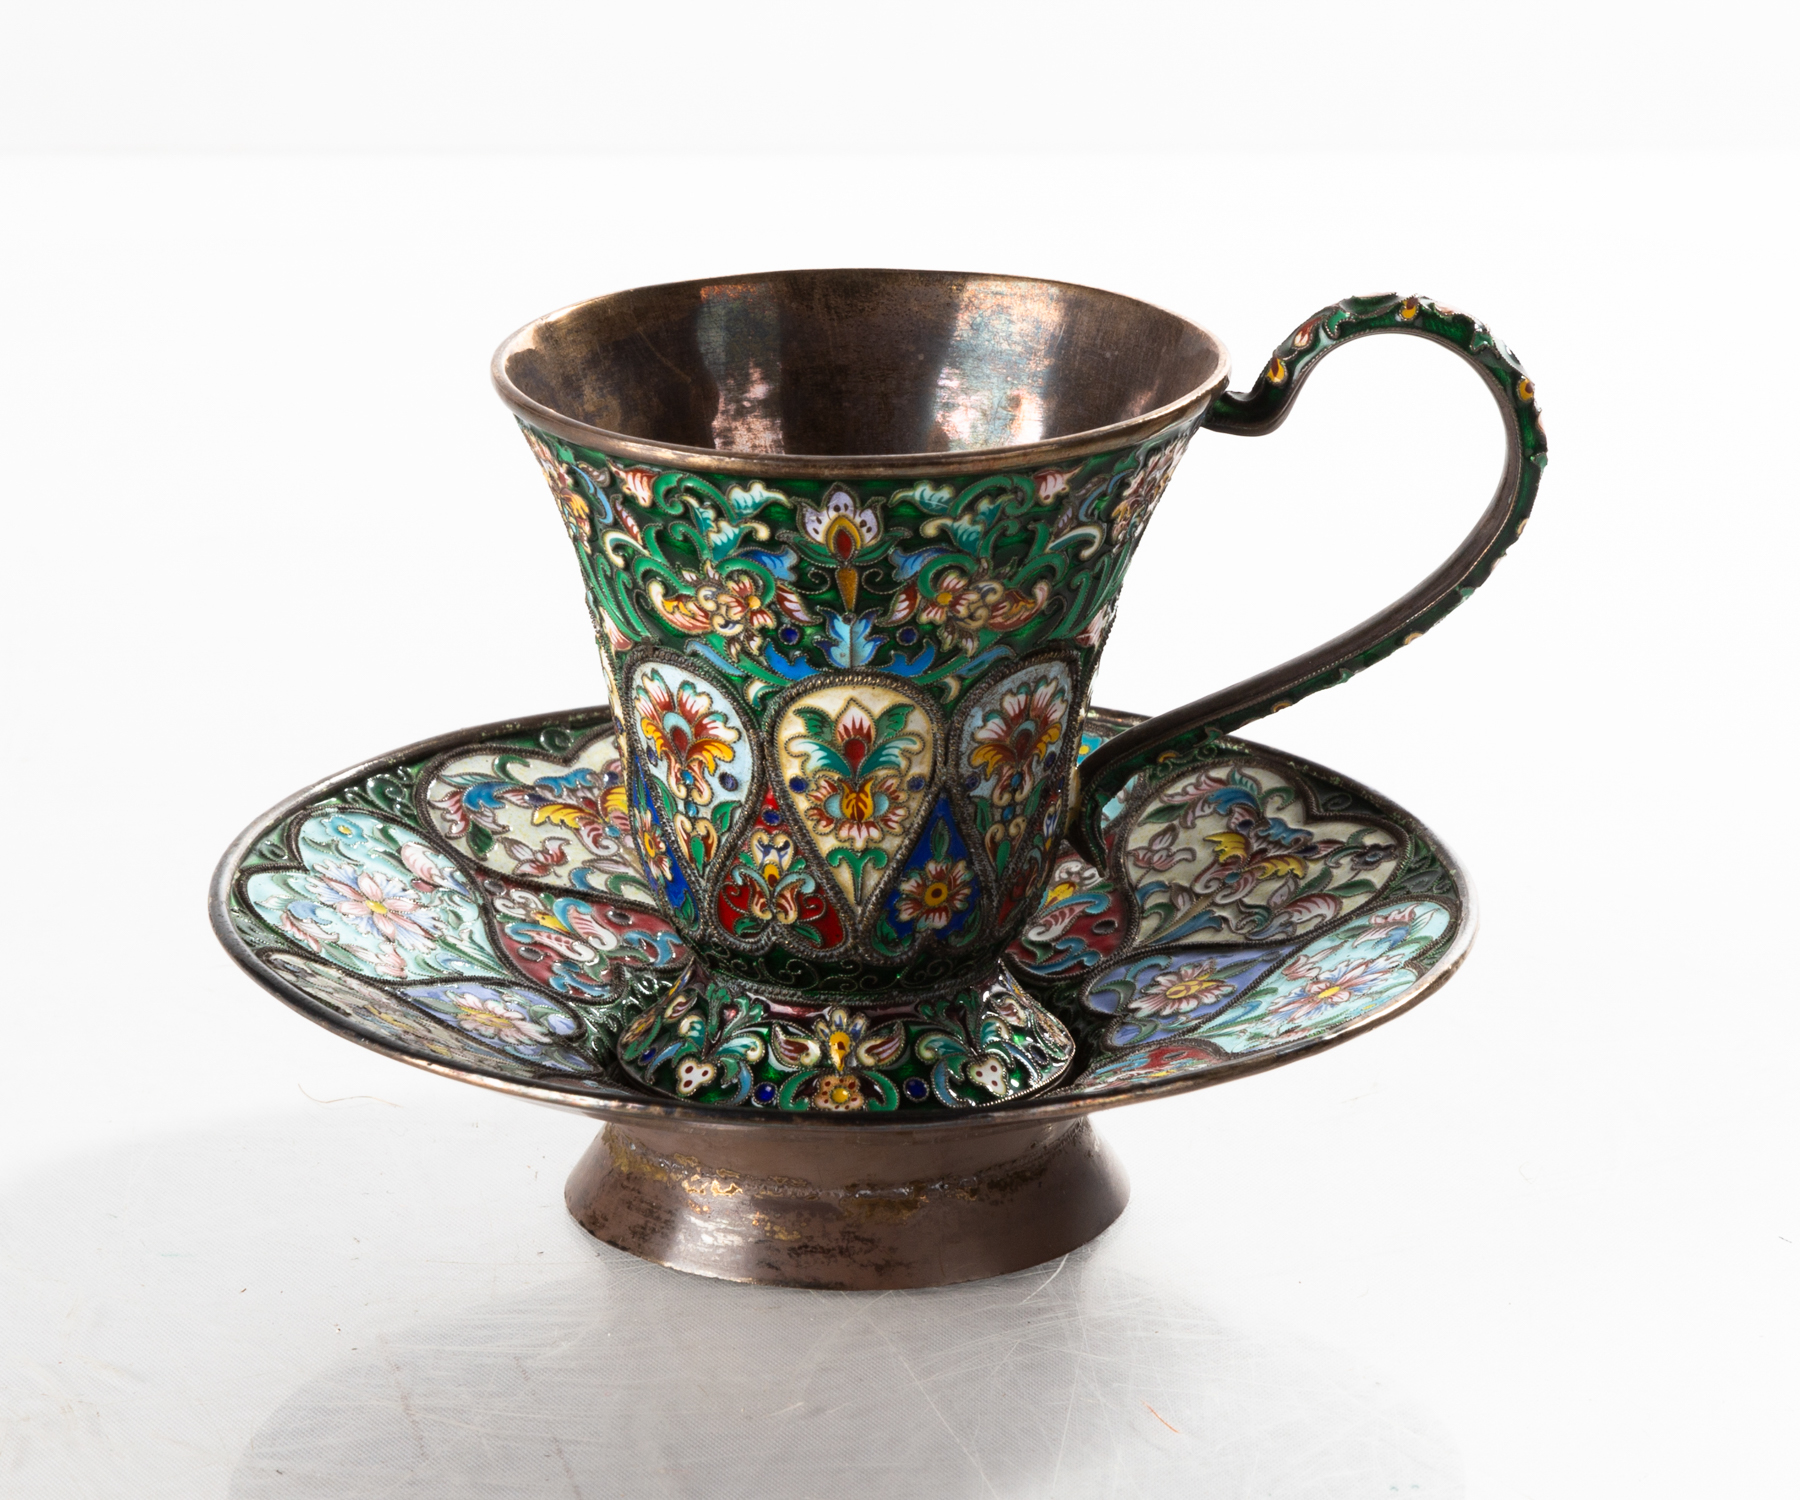 RUSSIAN SILVER AND ENAMEL CUP AND